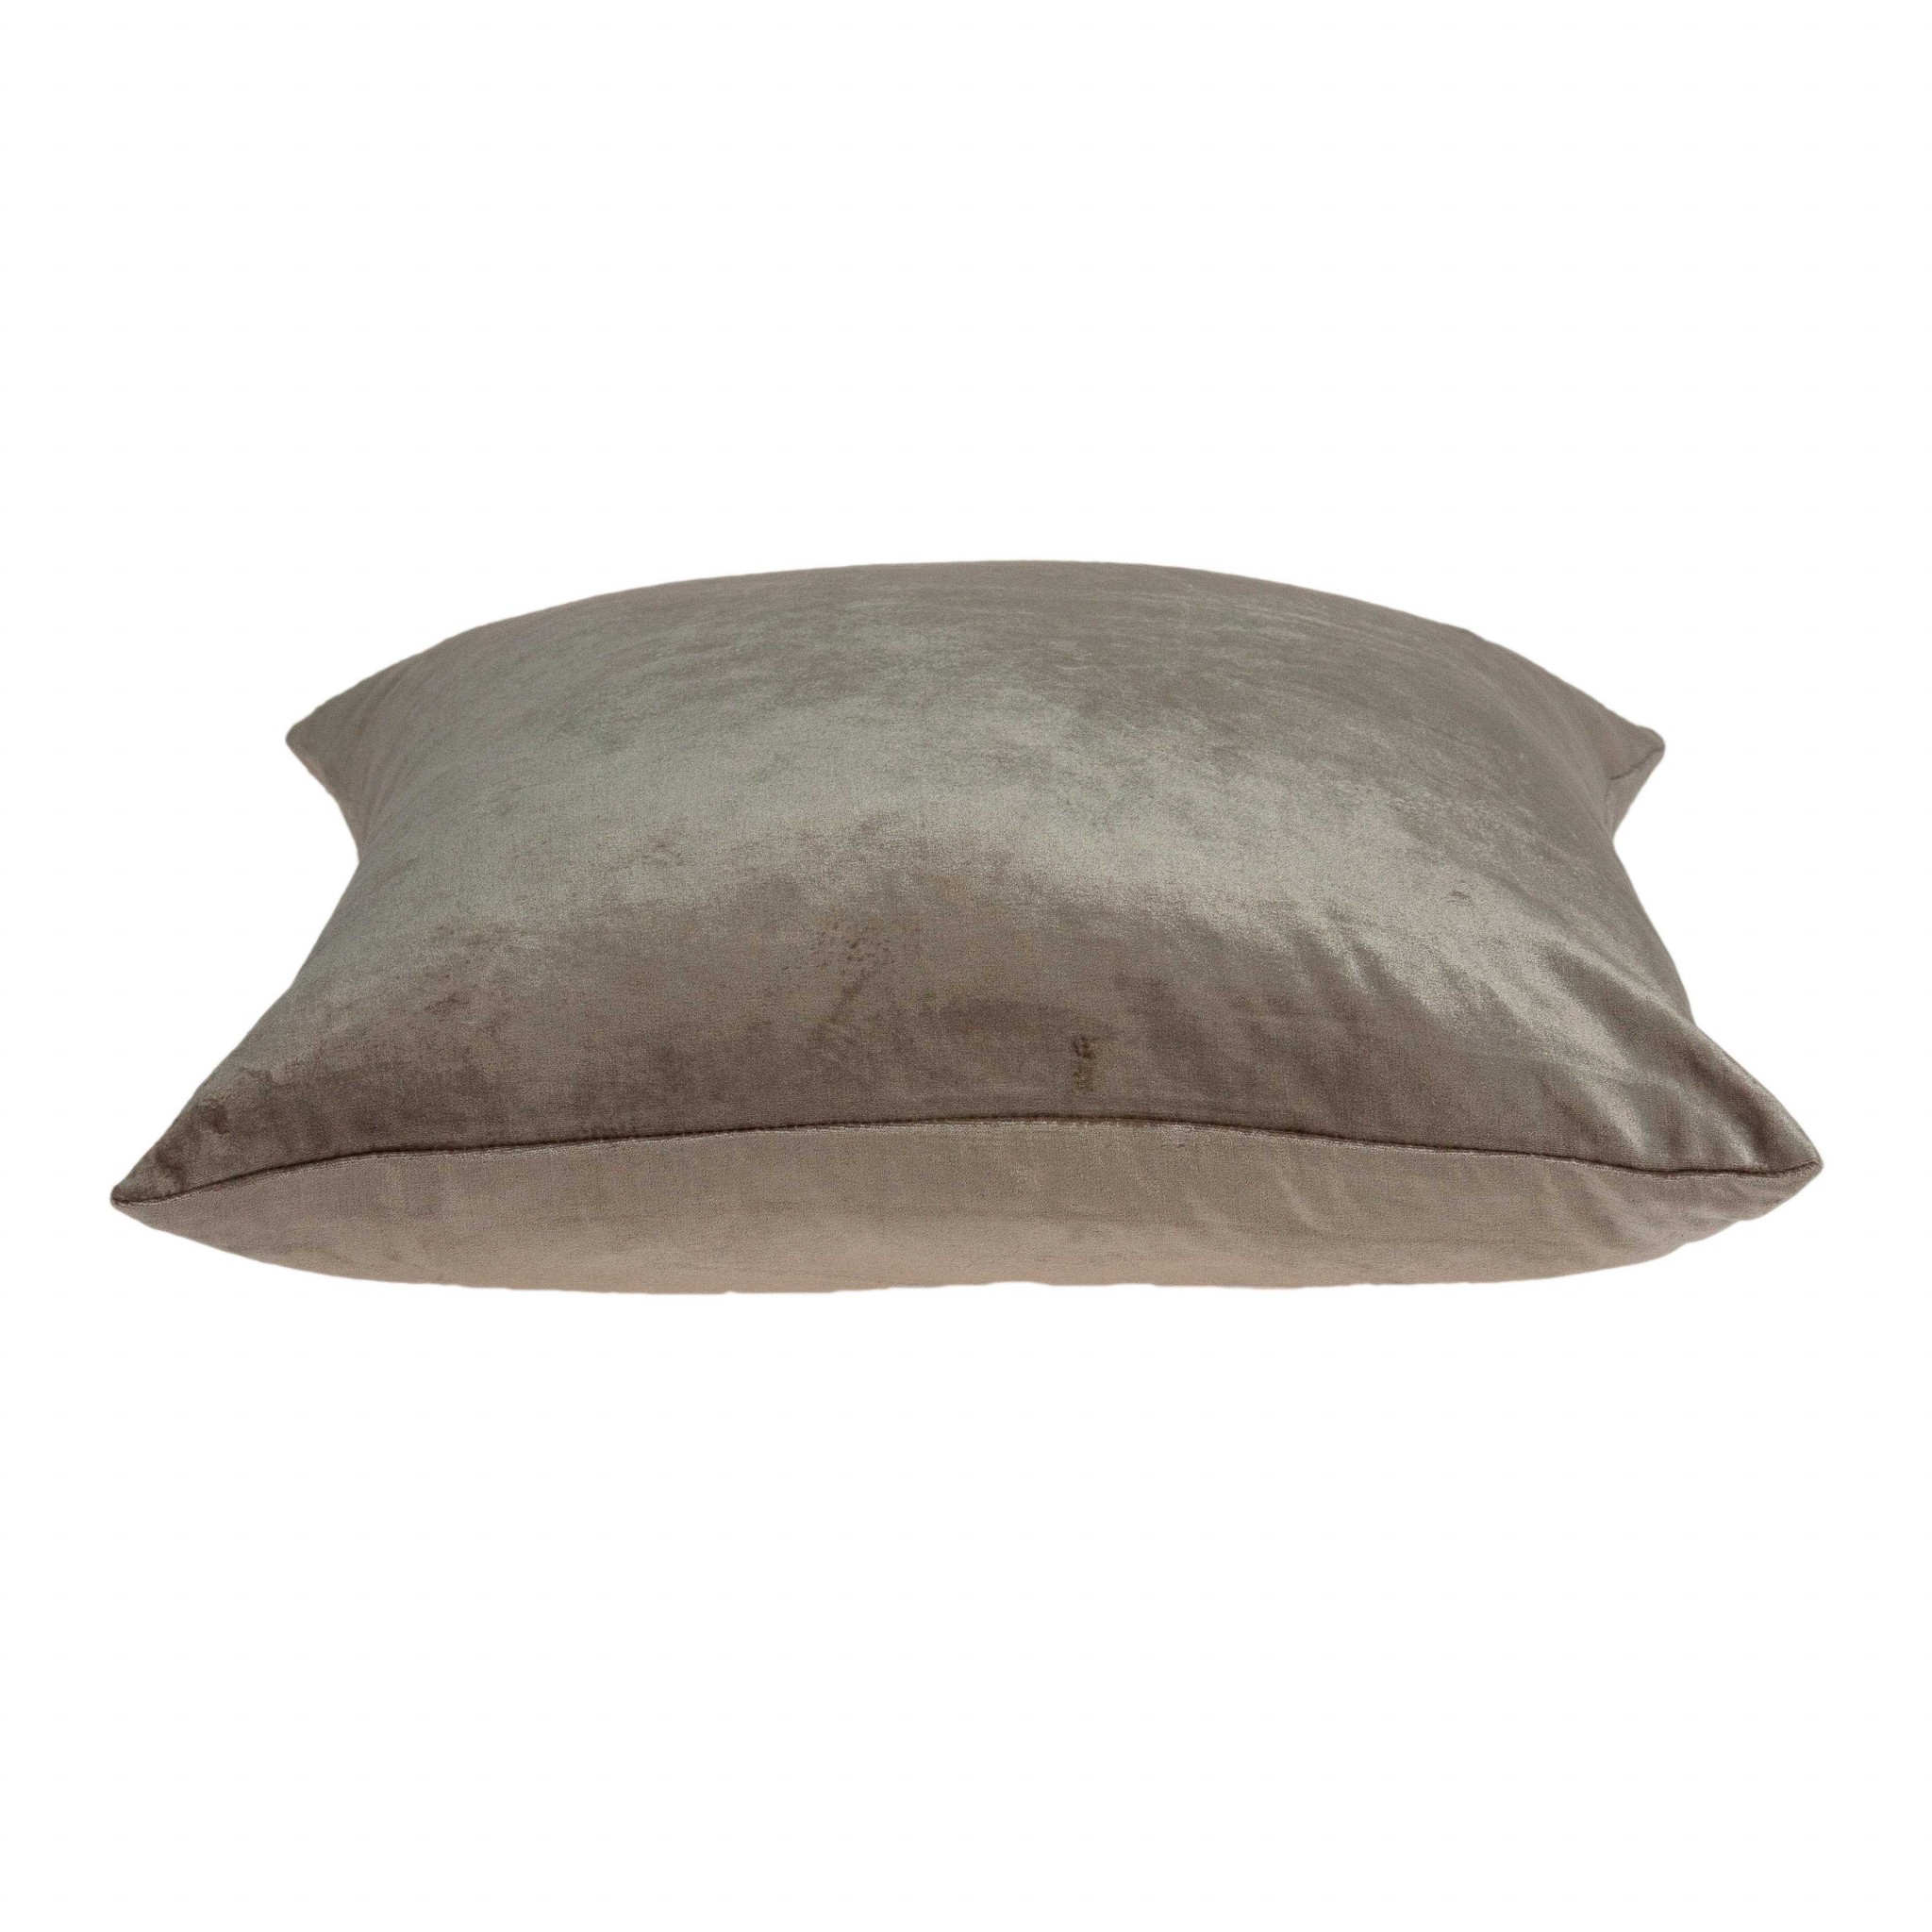 18" x 7" x 18" Transitional Taupe Solid Pillow Cover With Down Insert